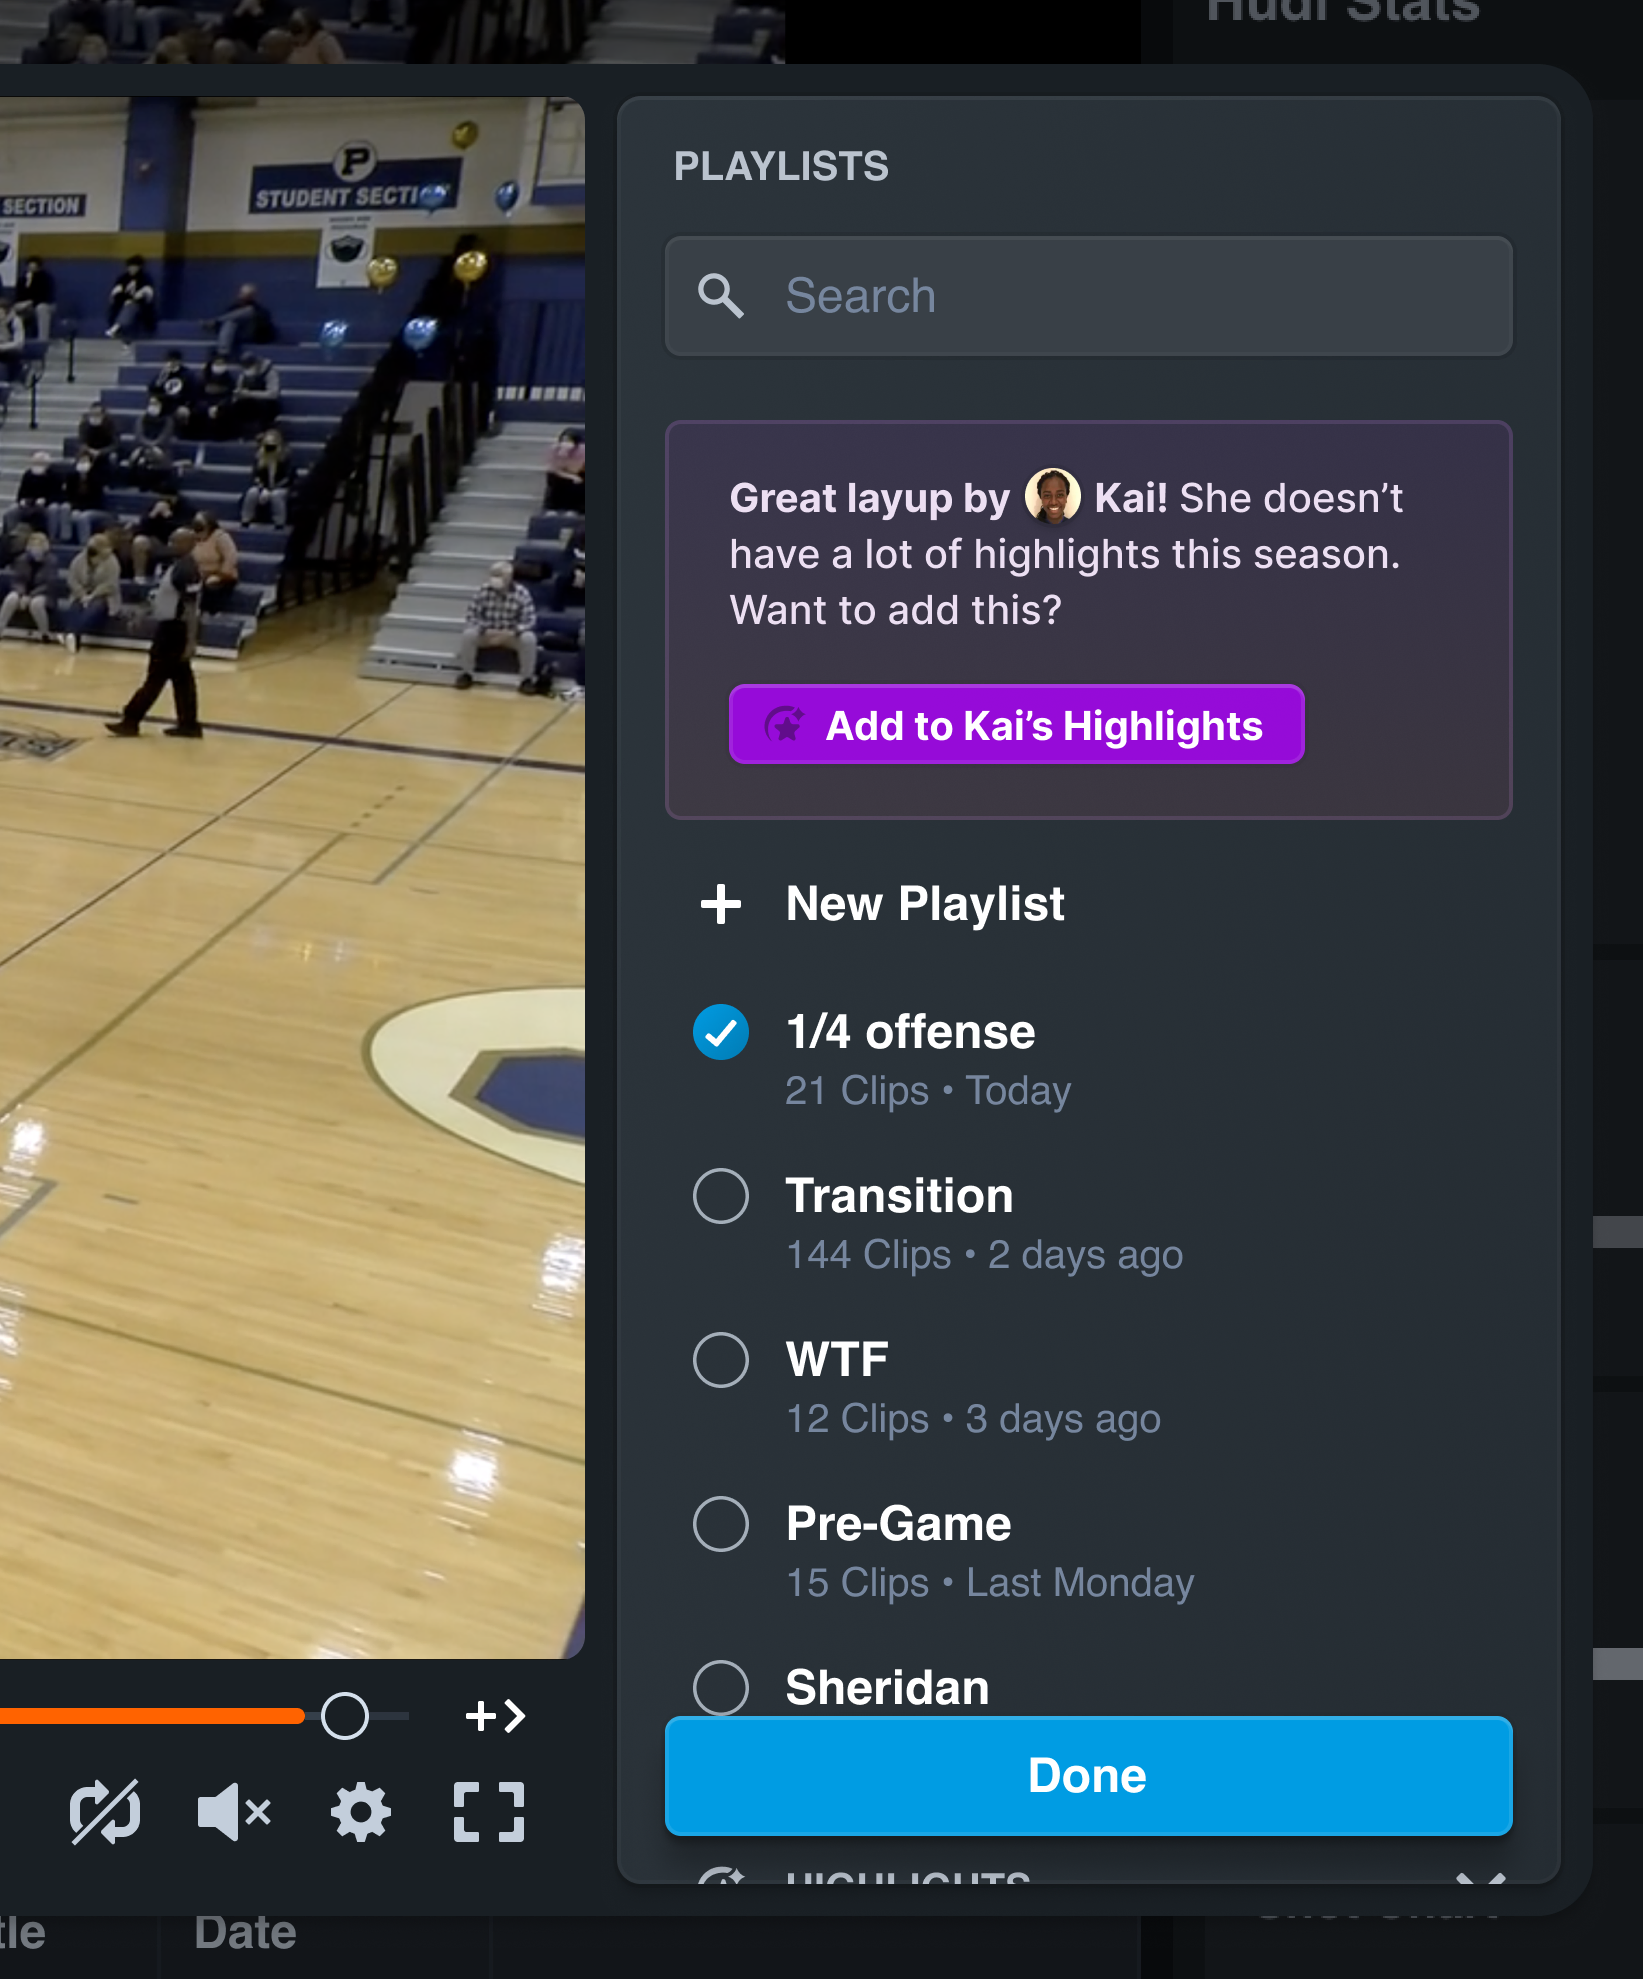 A screenshot of a tool allowing users to create custom clips of sports game. On the right side is a search input to search for playlists. Below that is a section indicating that a player doesn't have many hightlights and it encourages the user to add this clip to her highlights. Below that are several differen playlists which can be selected, then a button that says 'Done'.